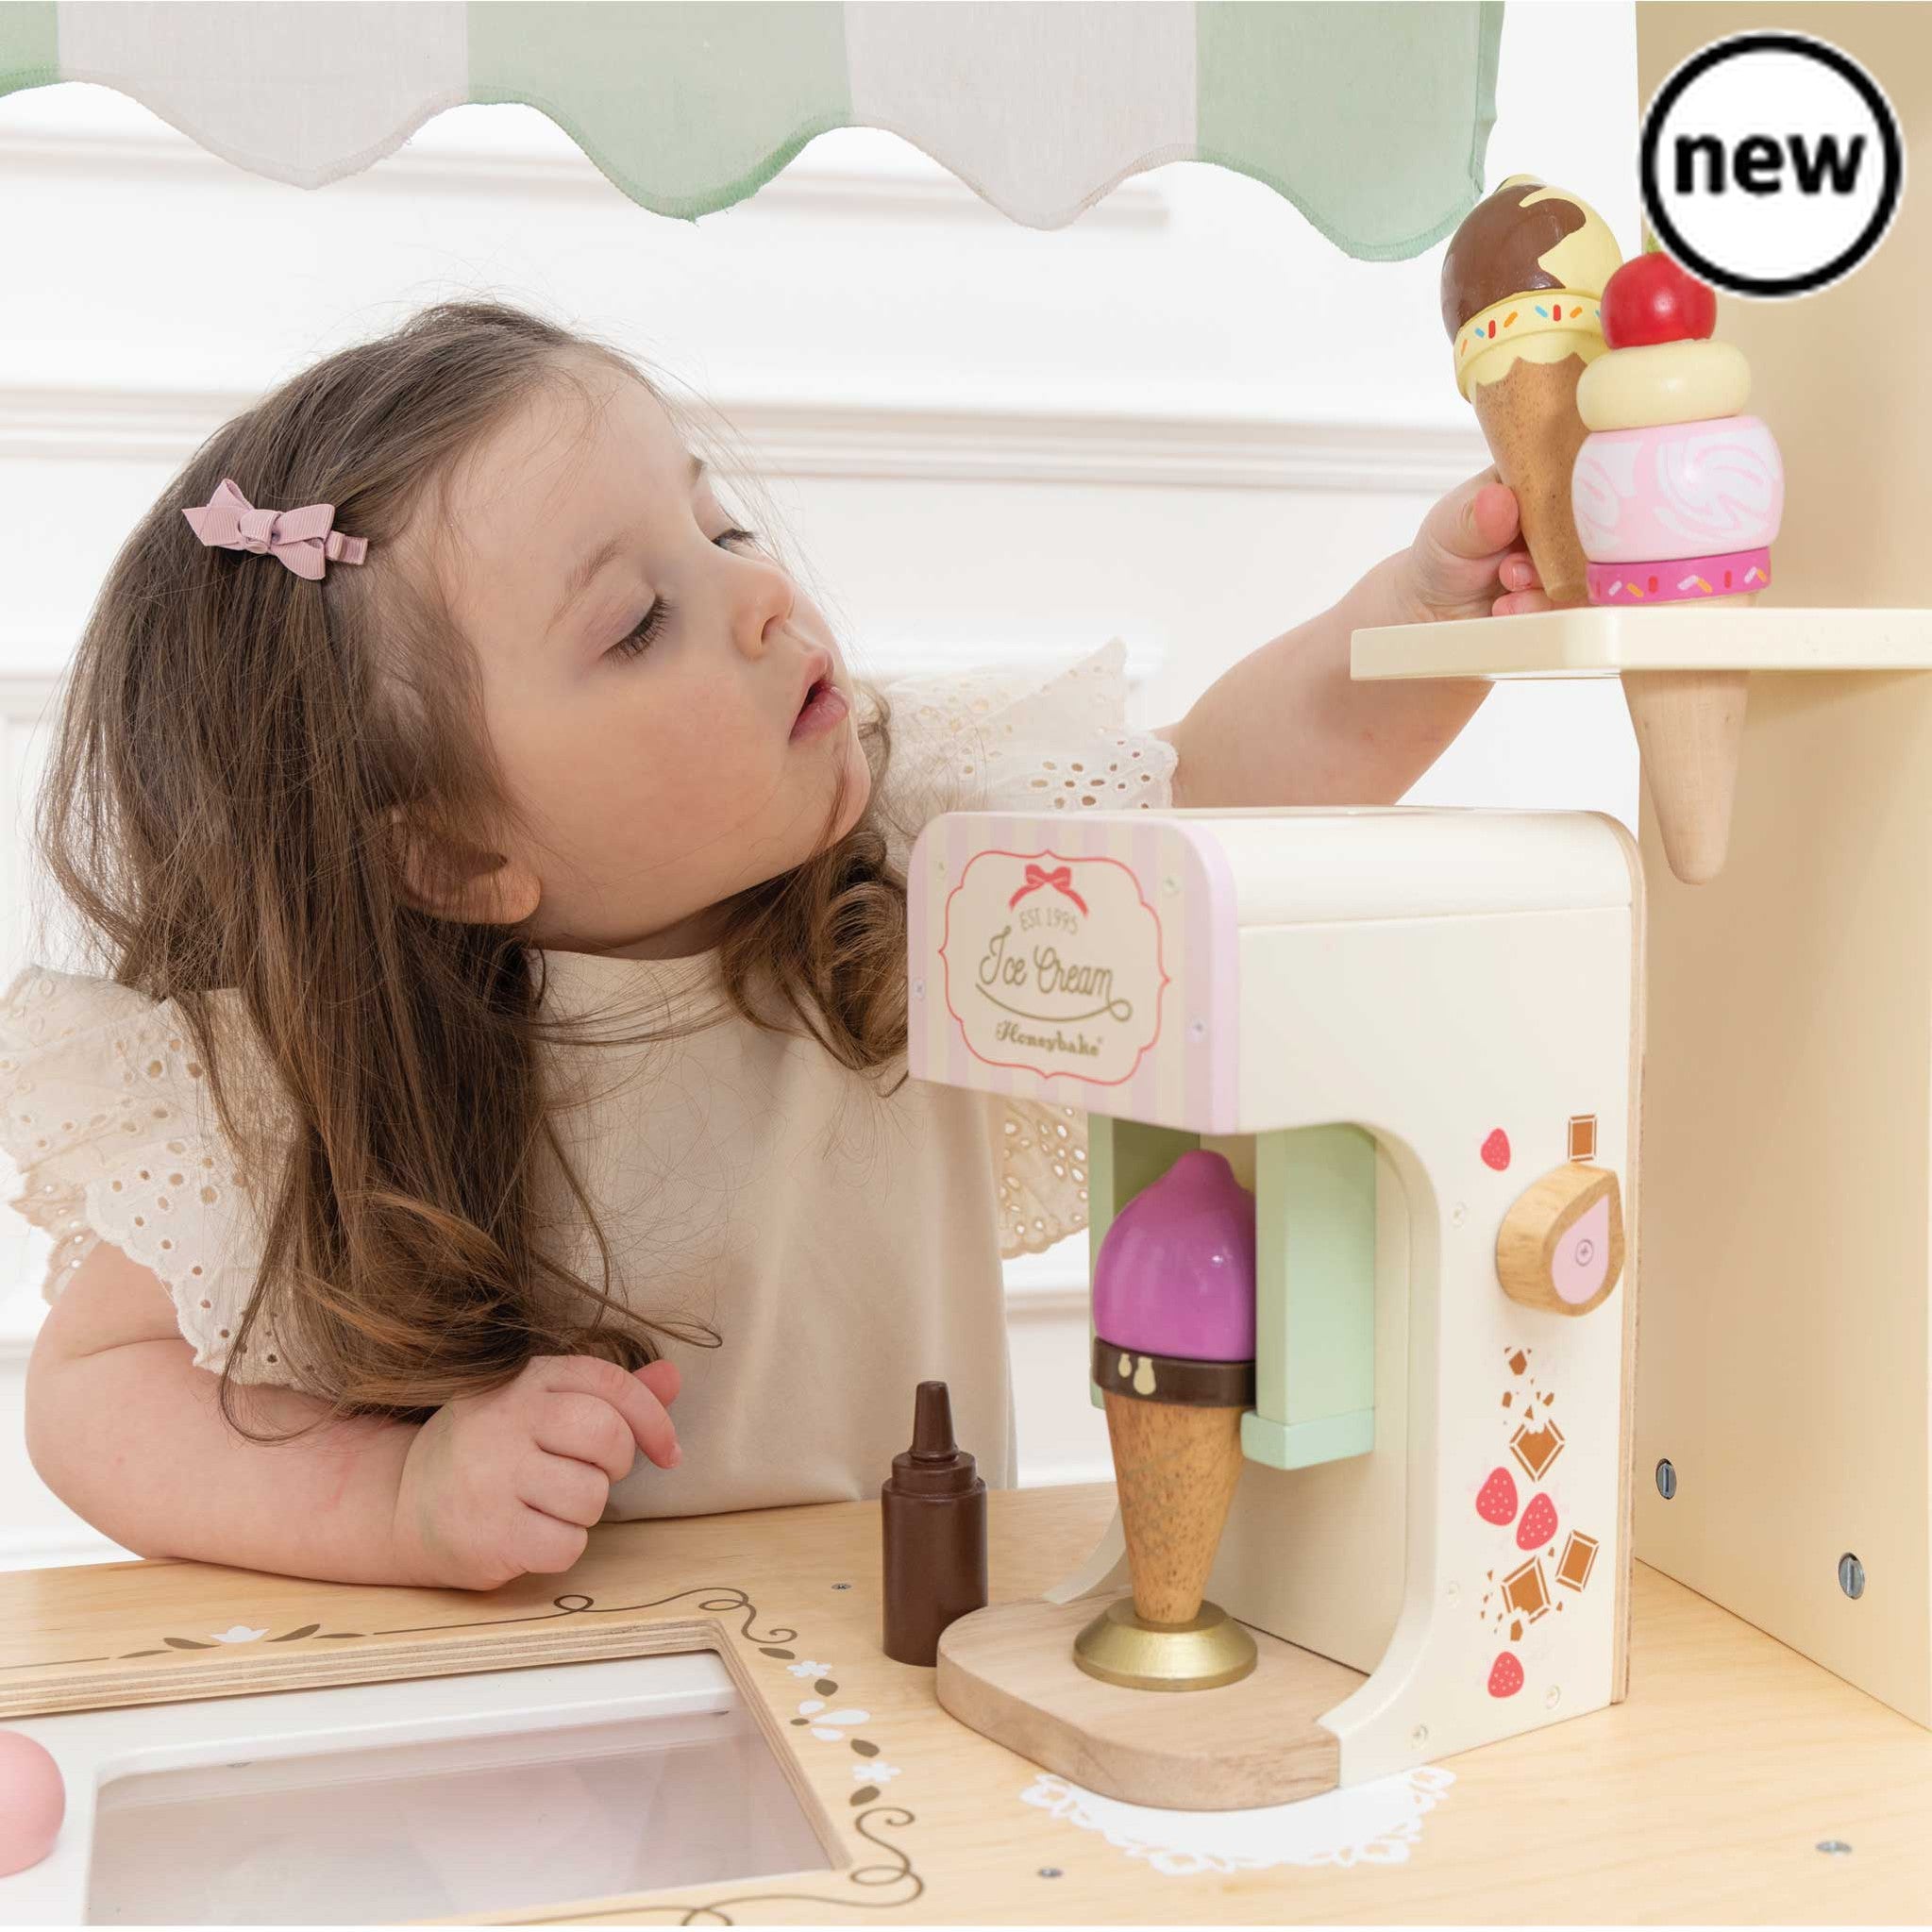 Ice Cream Trolley and Treats, This whimsical Ice-Cream Trolley toy is a nostalgic nod to bygone days and fairs, encouraging both imaginative play and a sense of wonder in children. Key Features Design: The trolley features a barrow style with a classic striped fabric canopy that adds to its vintage allure. Material: Crafted from sustainable wood, this toy is built to last for a lifetime of inspired play. Realistic Features: With an ice compartment featuring a sliding door, the trolley reveals illustrations 